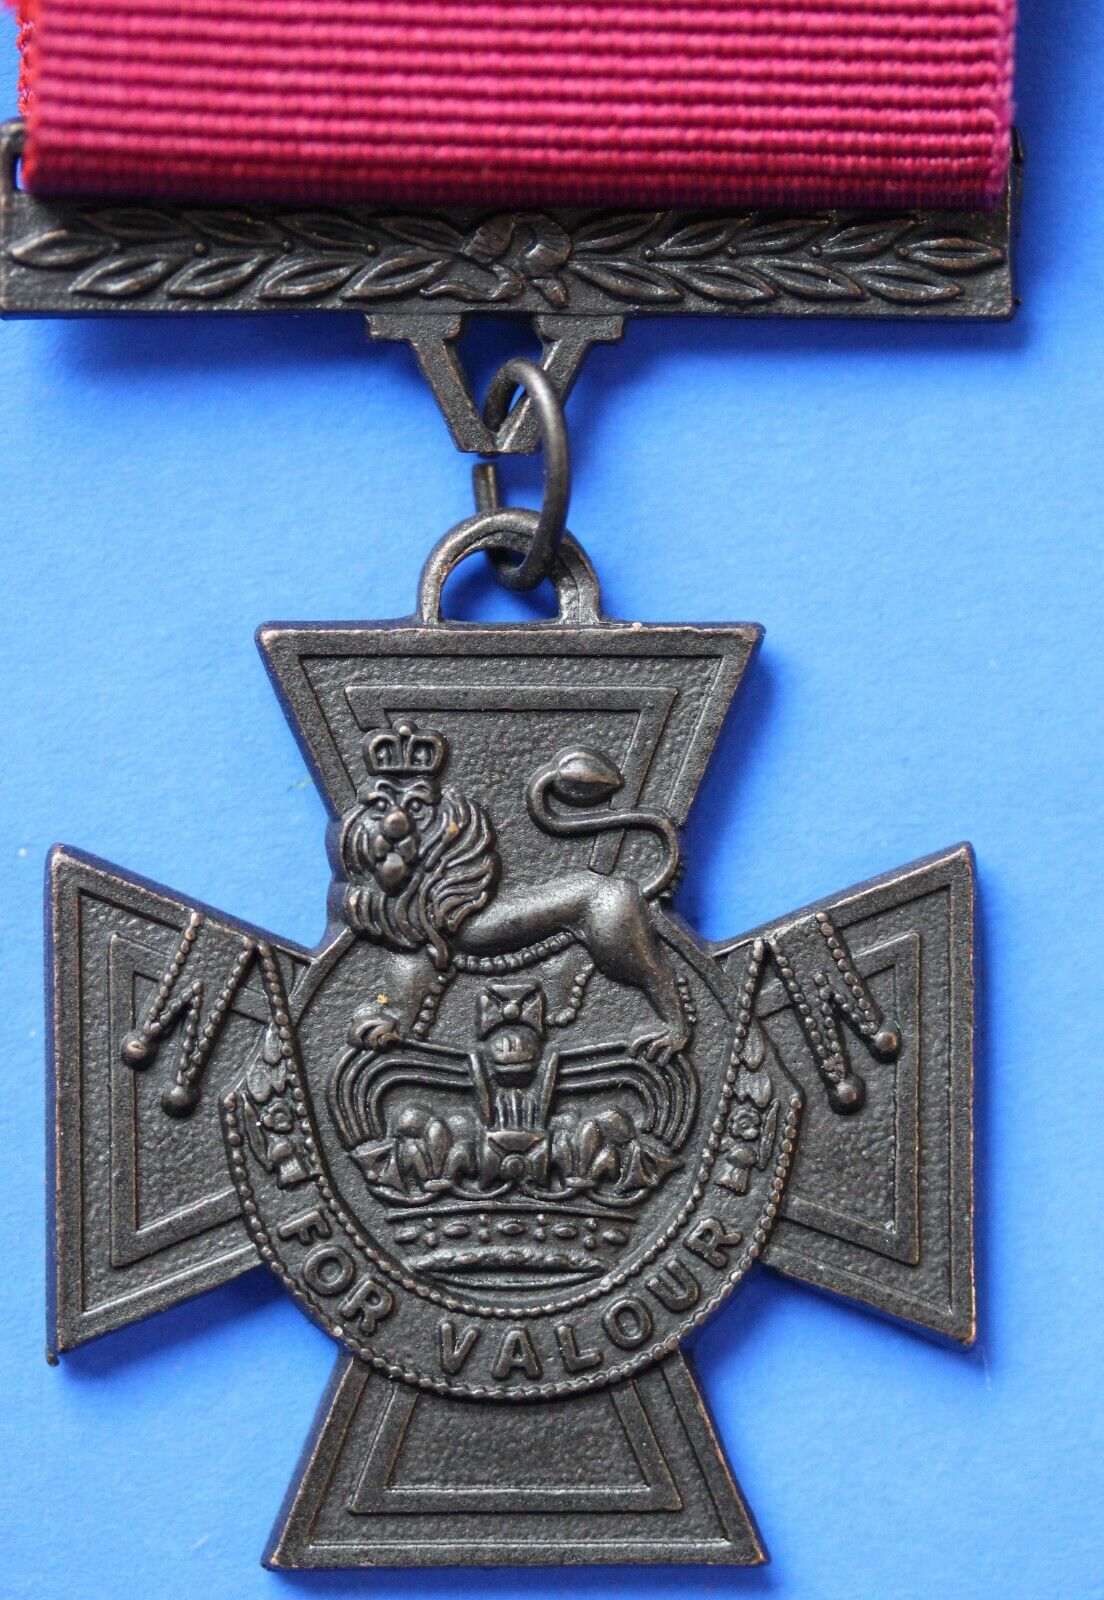 REPRODUCTION British Victoria Cross FULL SIZE Medal For Valour *[VC]